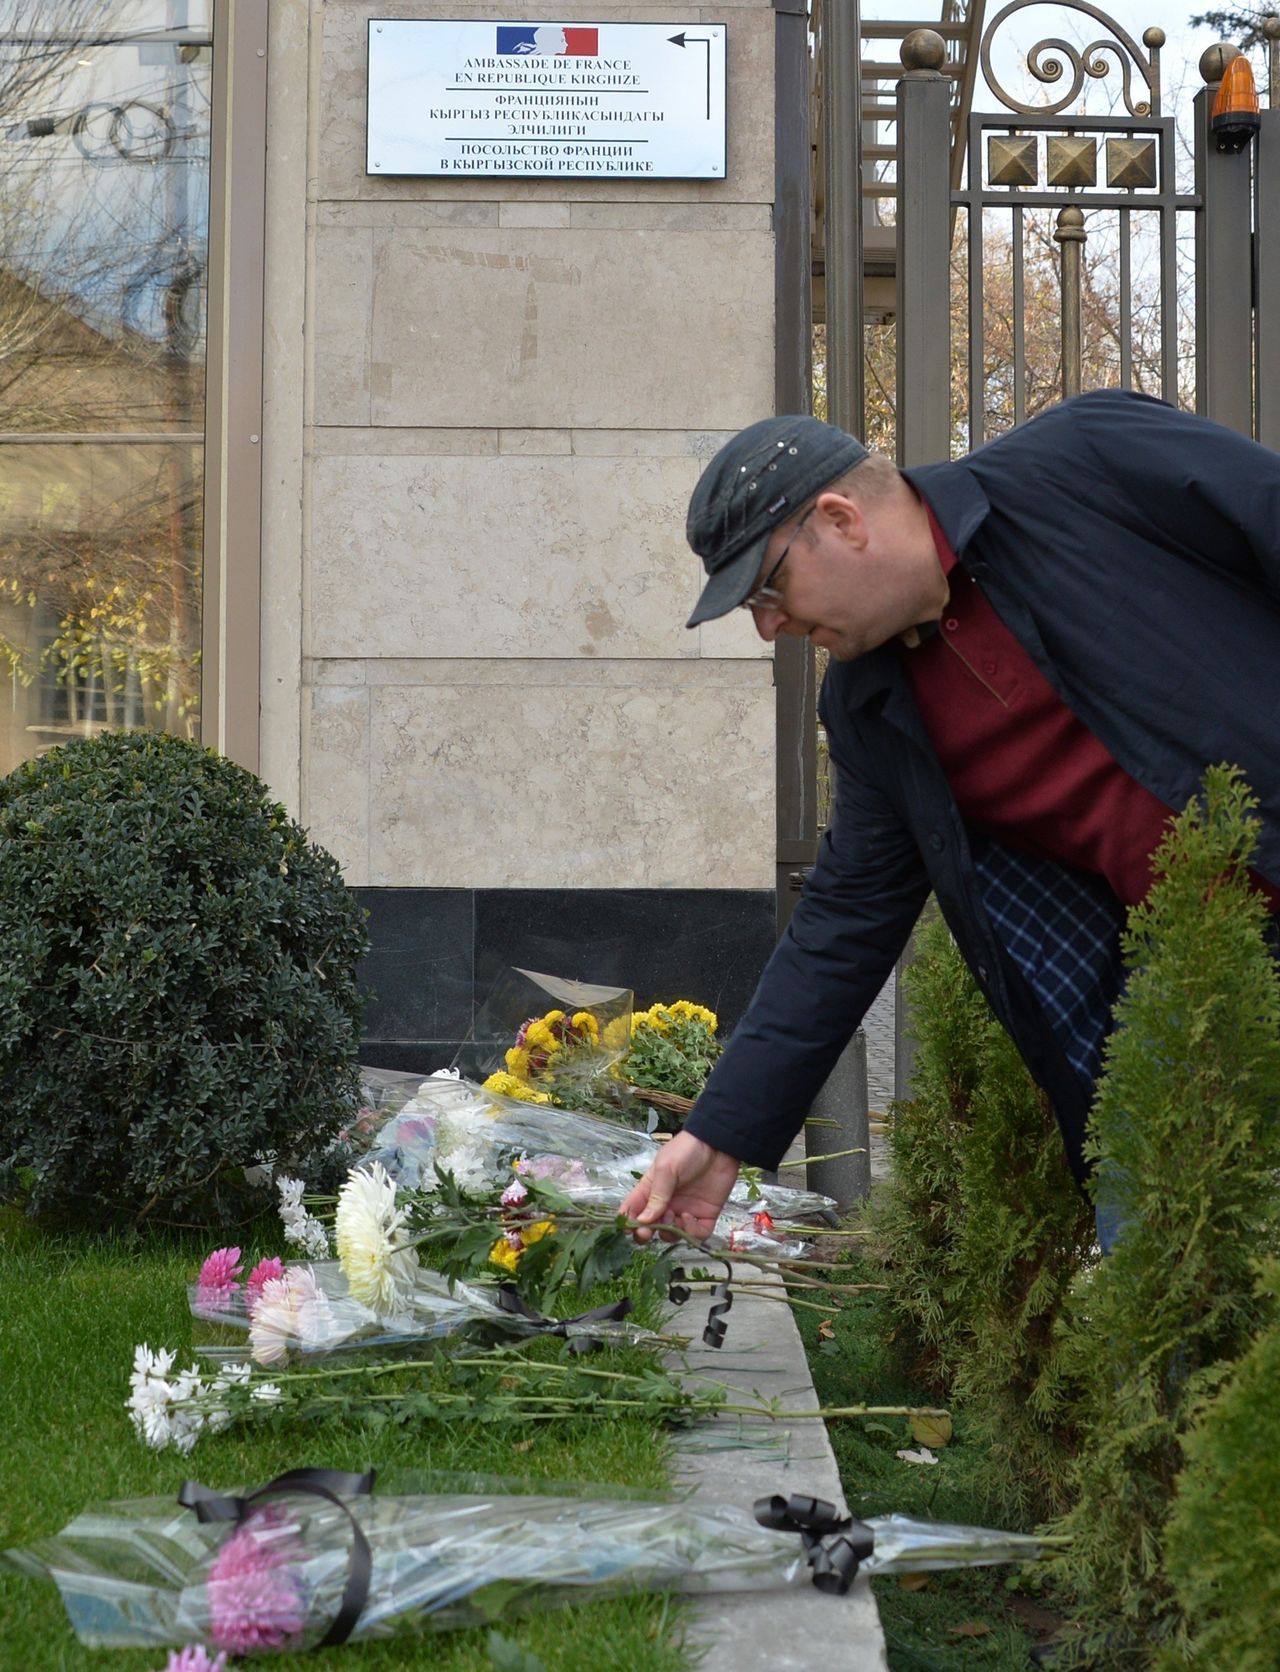 A man places flowers outside the French embassy in Bishkek, Kyrgyzstan, on Nov. 14, 2015.